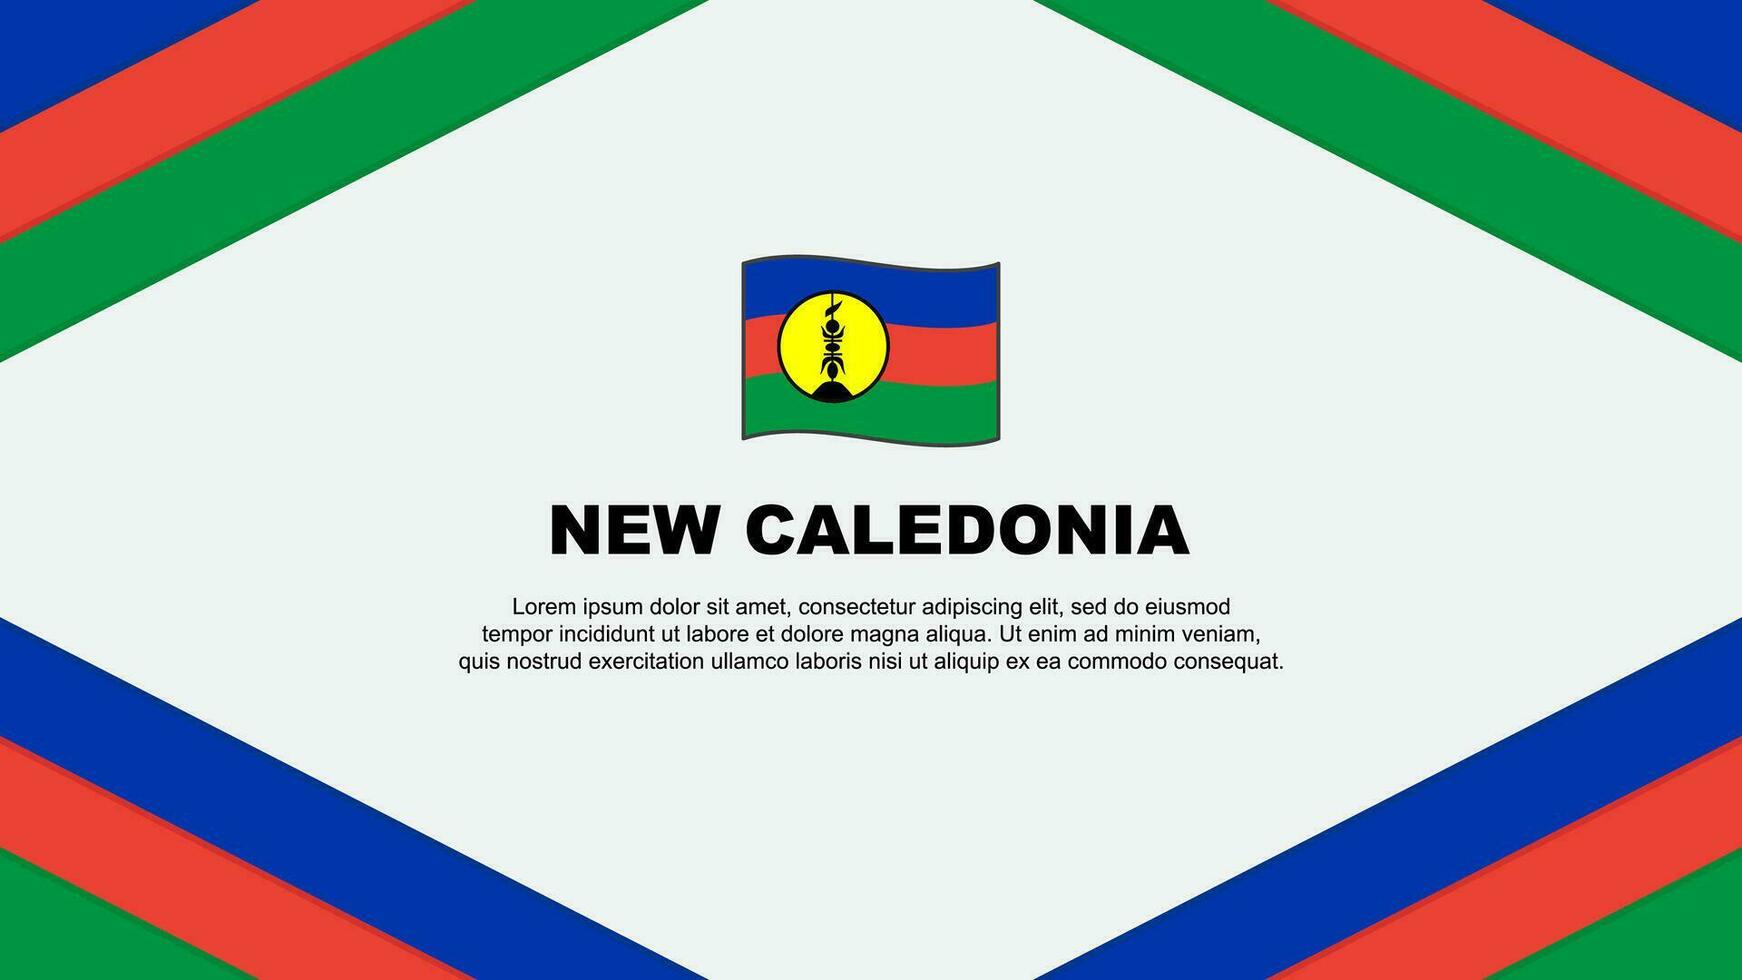 New Caledonia Flag Abstract Background Design Template. New Caledonia Independence Day Banner Cartoon Vector Illustration. Template